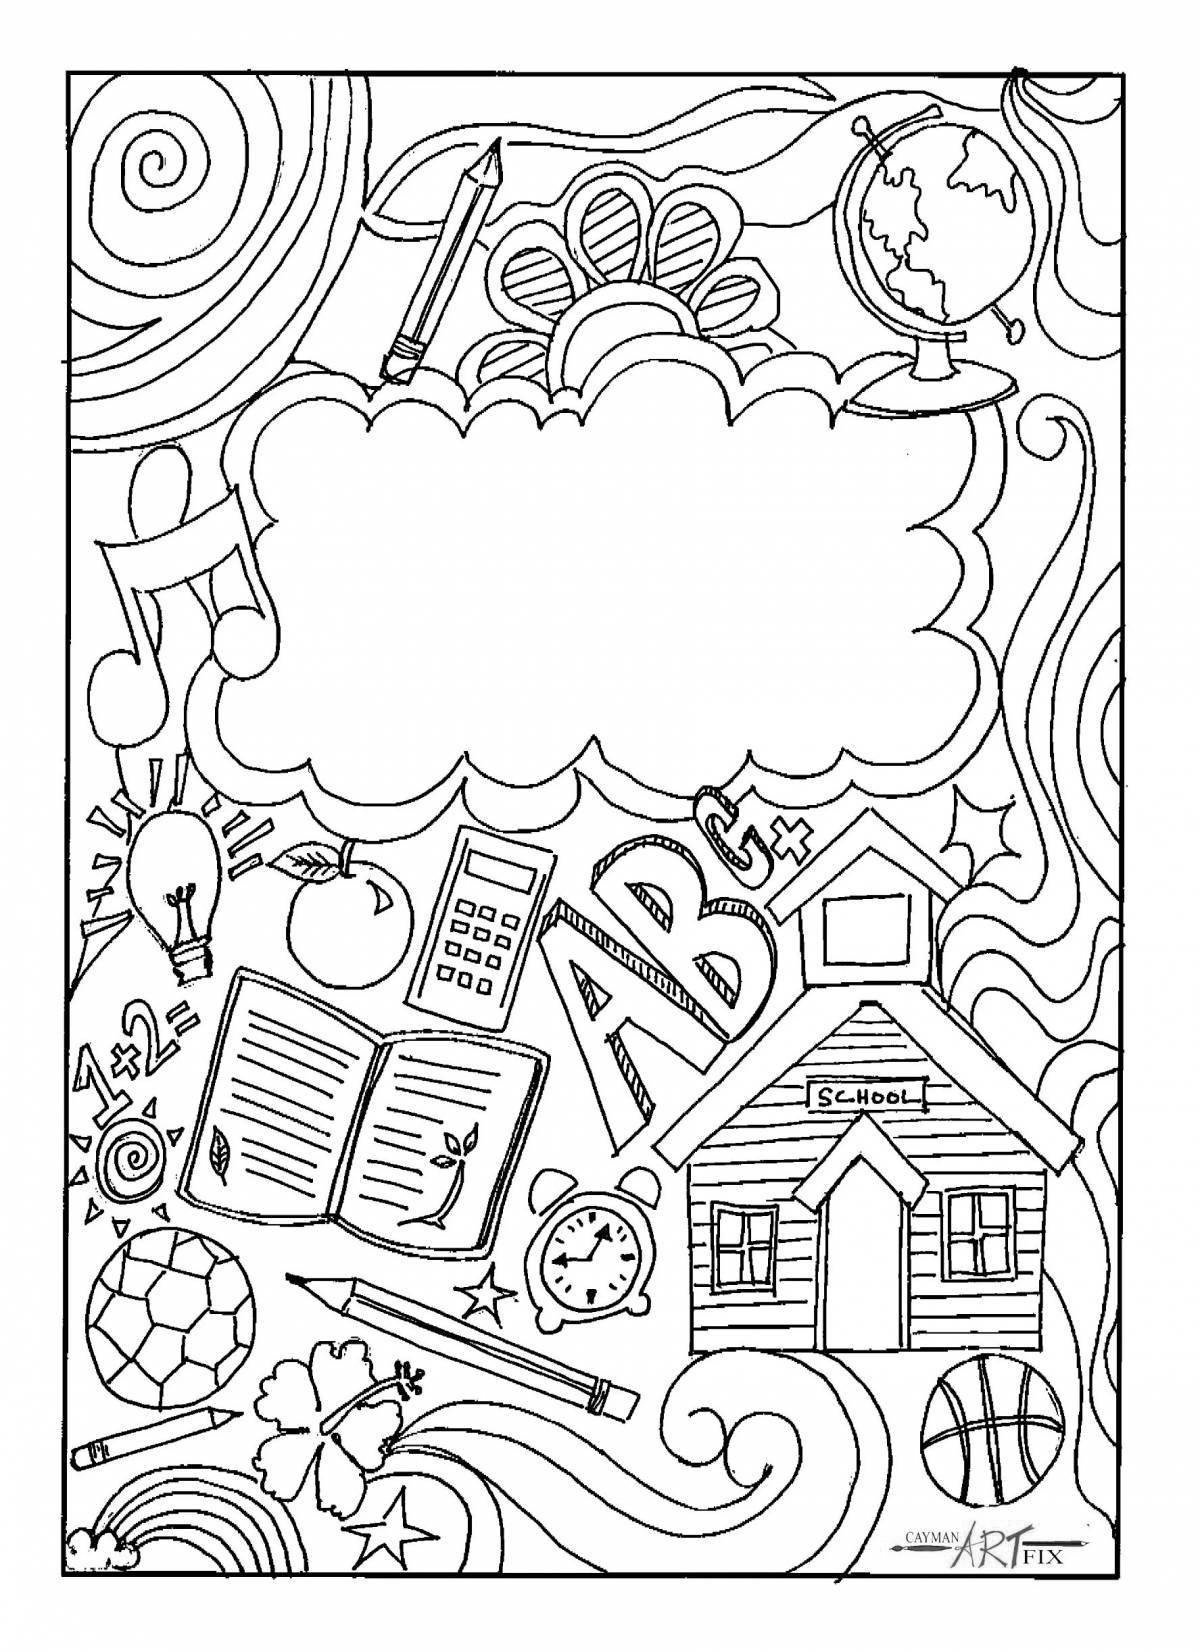 Joyful coloring book cover for kids